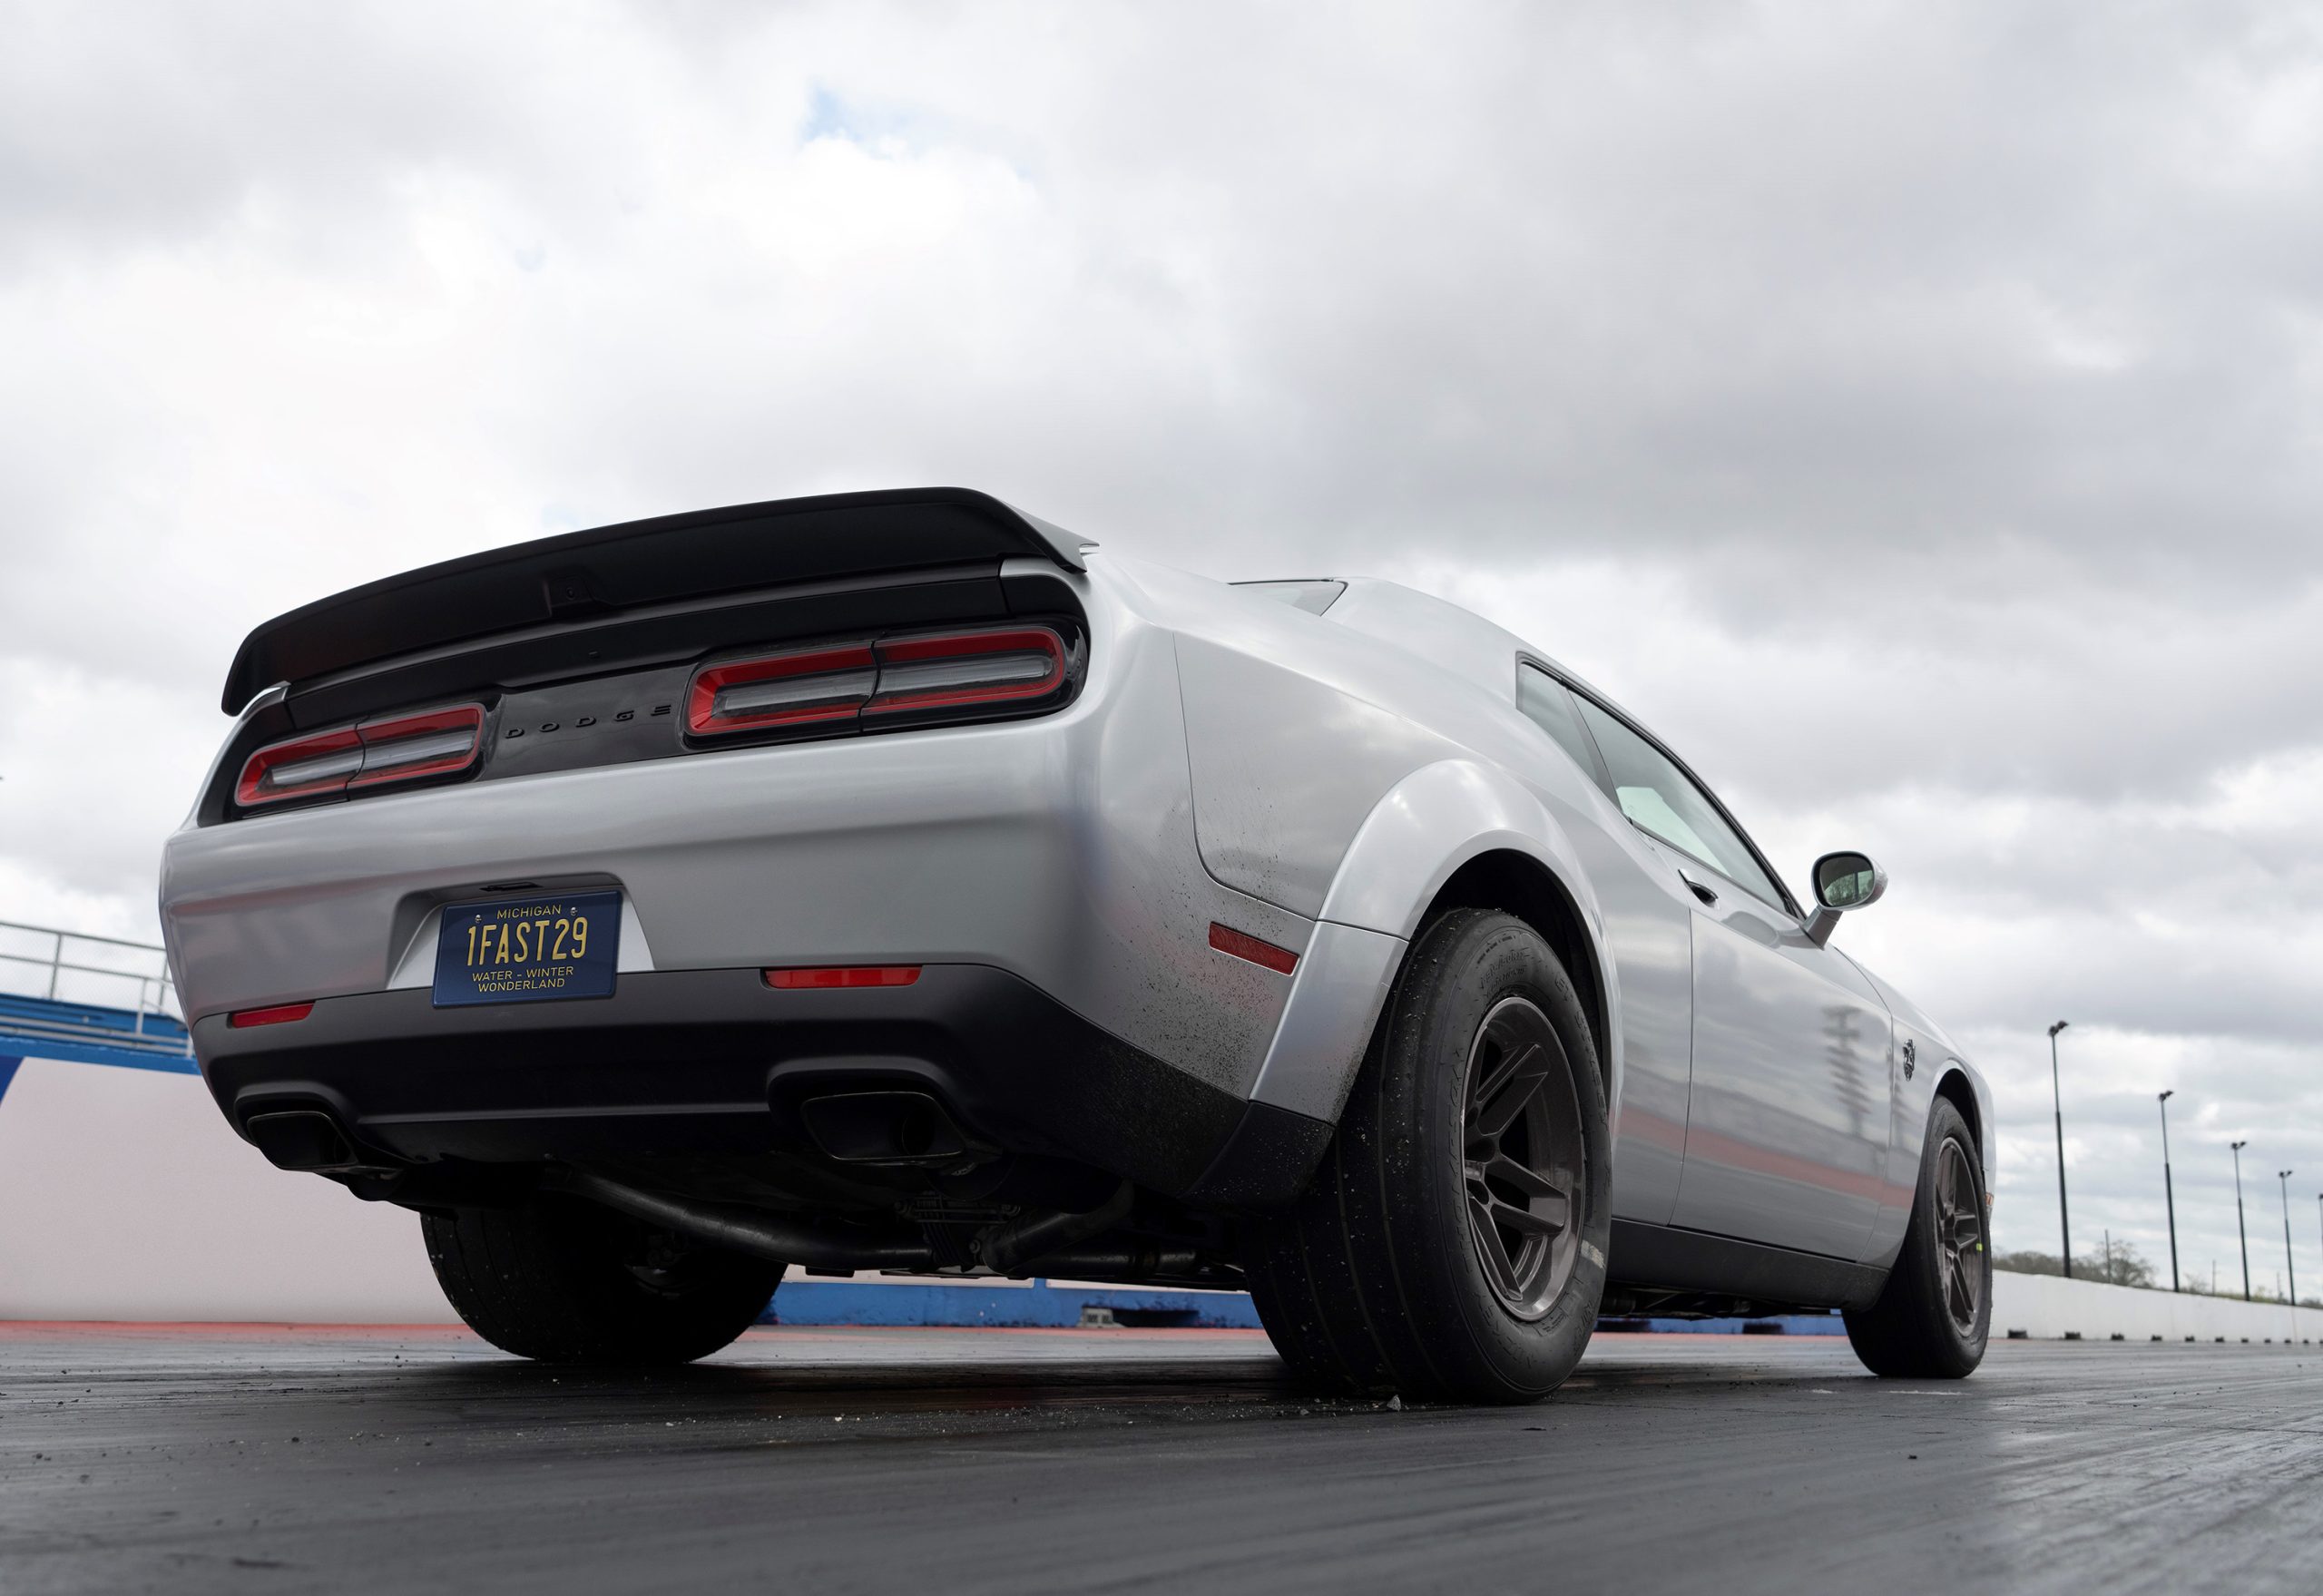 Dodge's Final "Last Call" Vehicle Revealed The 1,025 HP Dodge